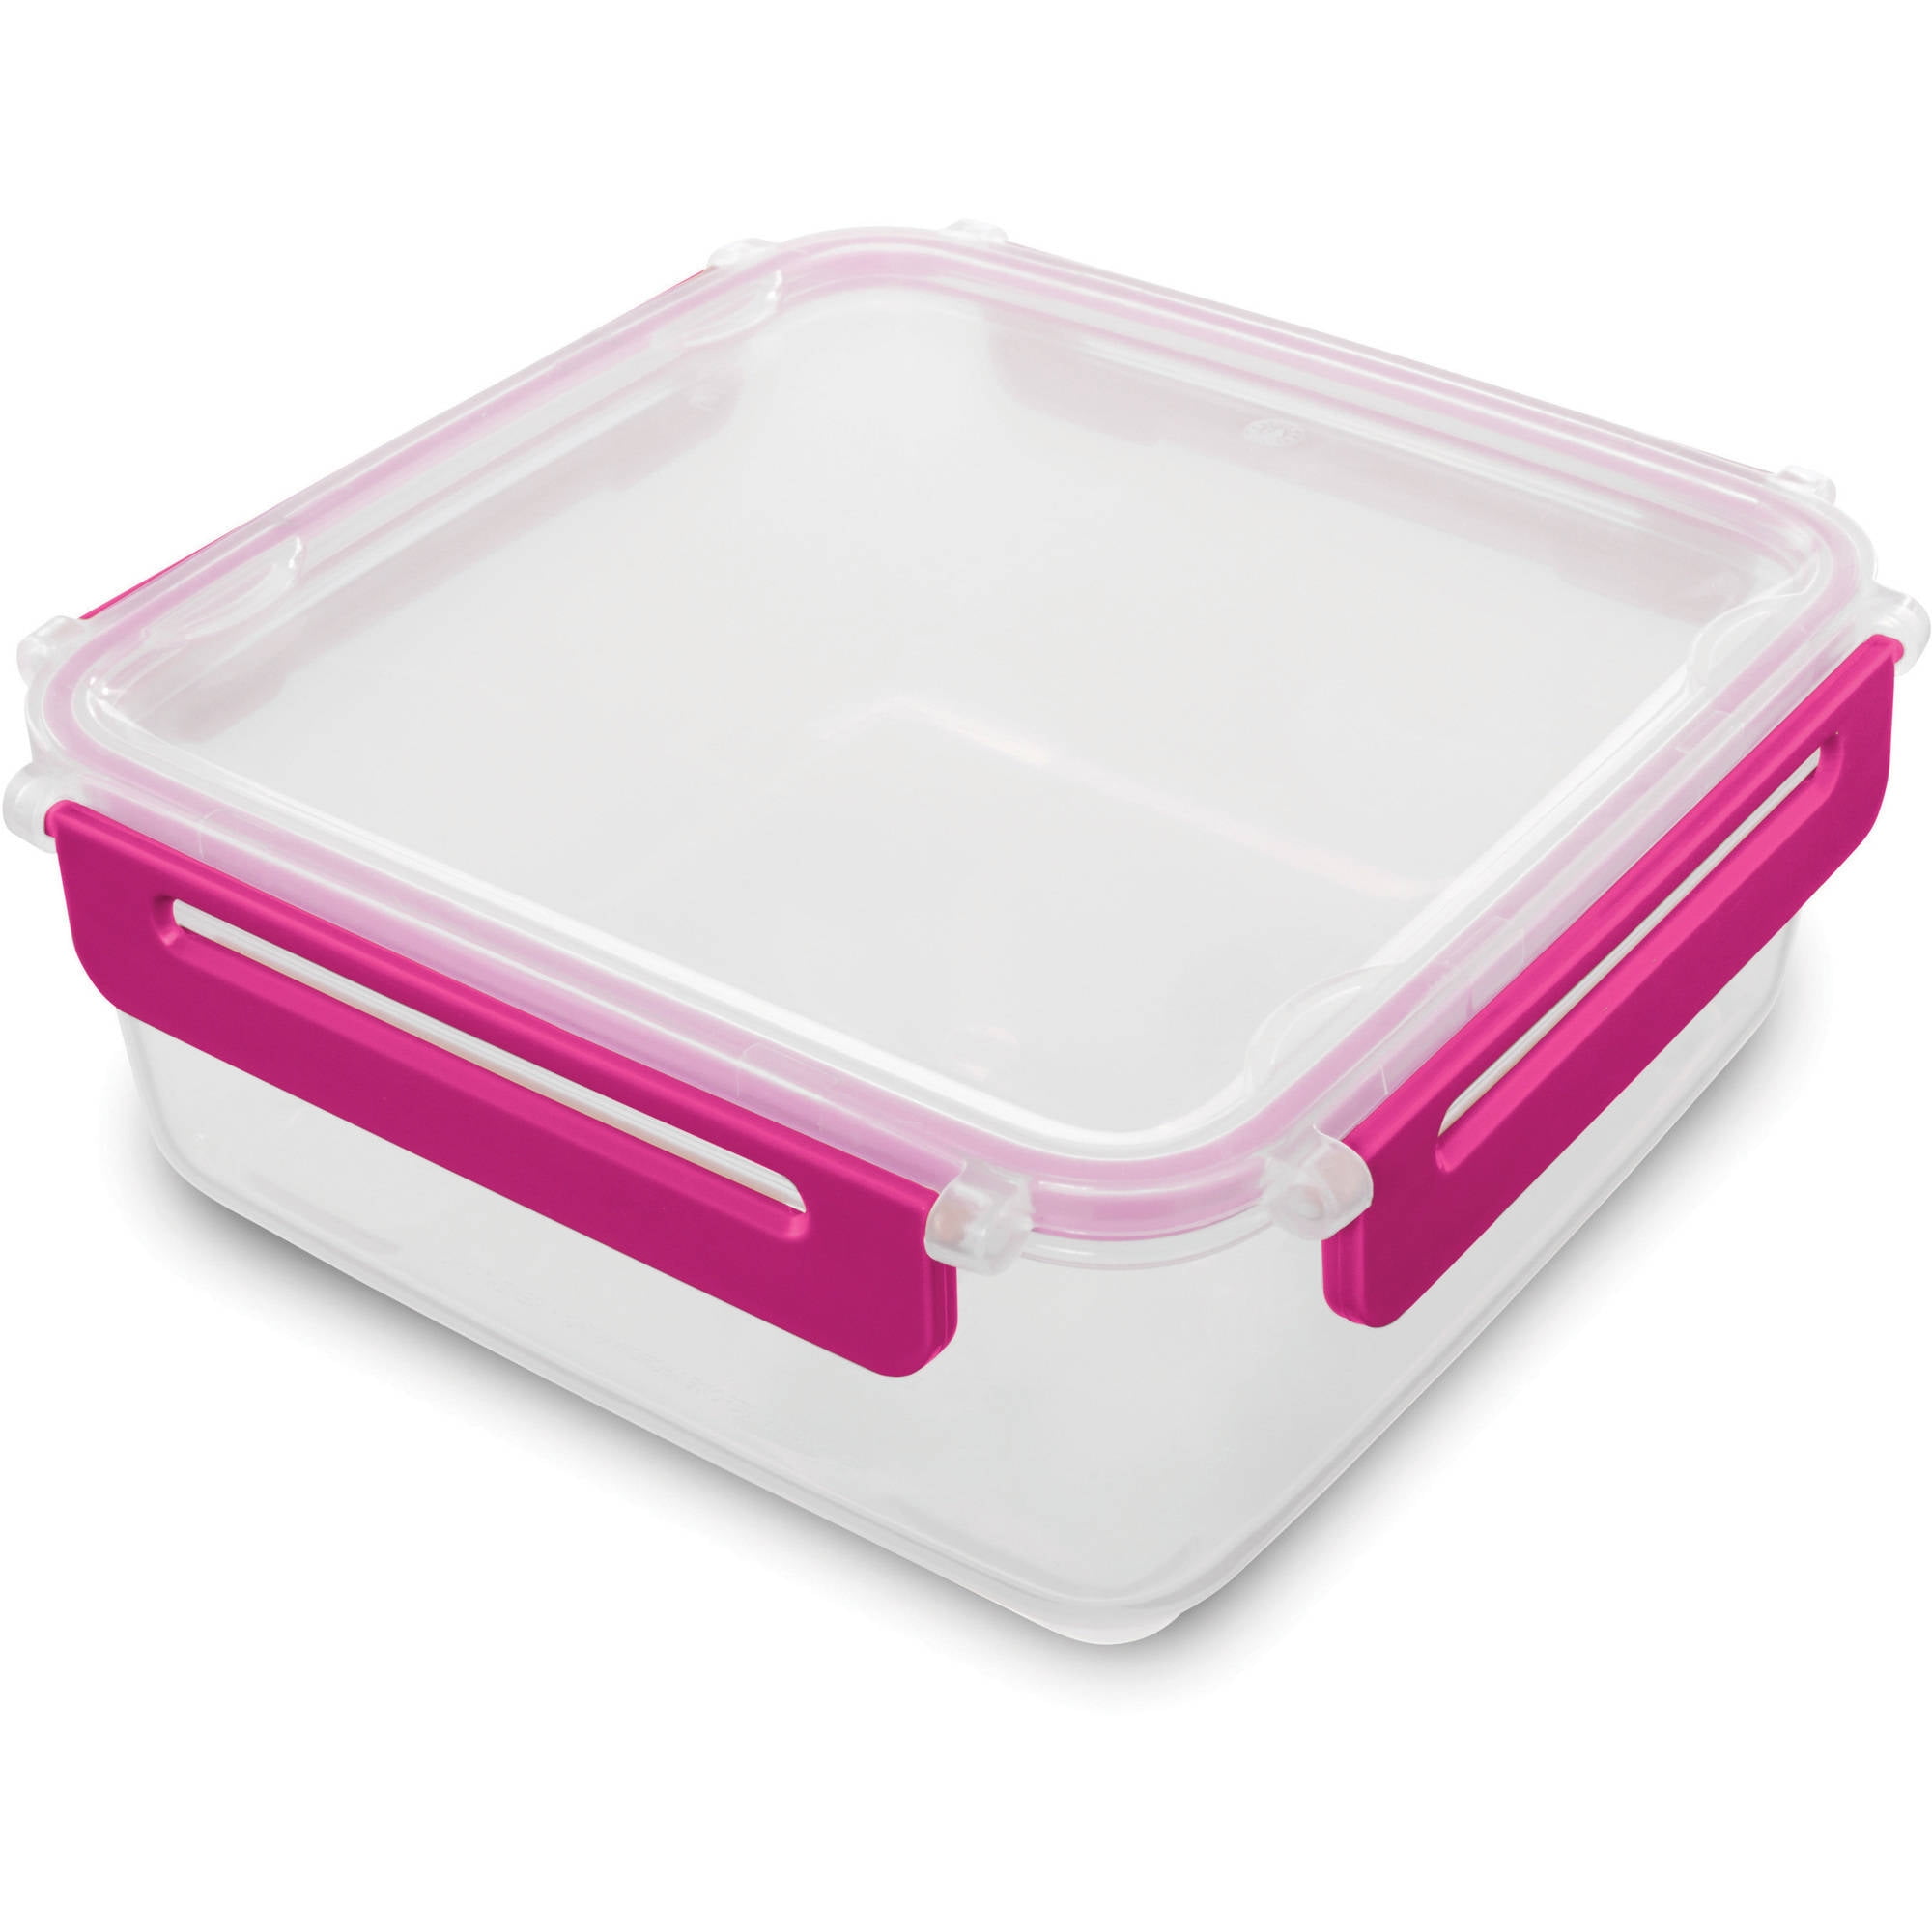 Home Basics Locking Multi-Compartment Plastic Lunch Box with Small